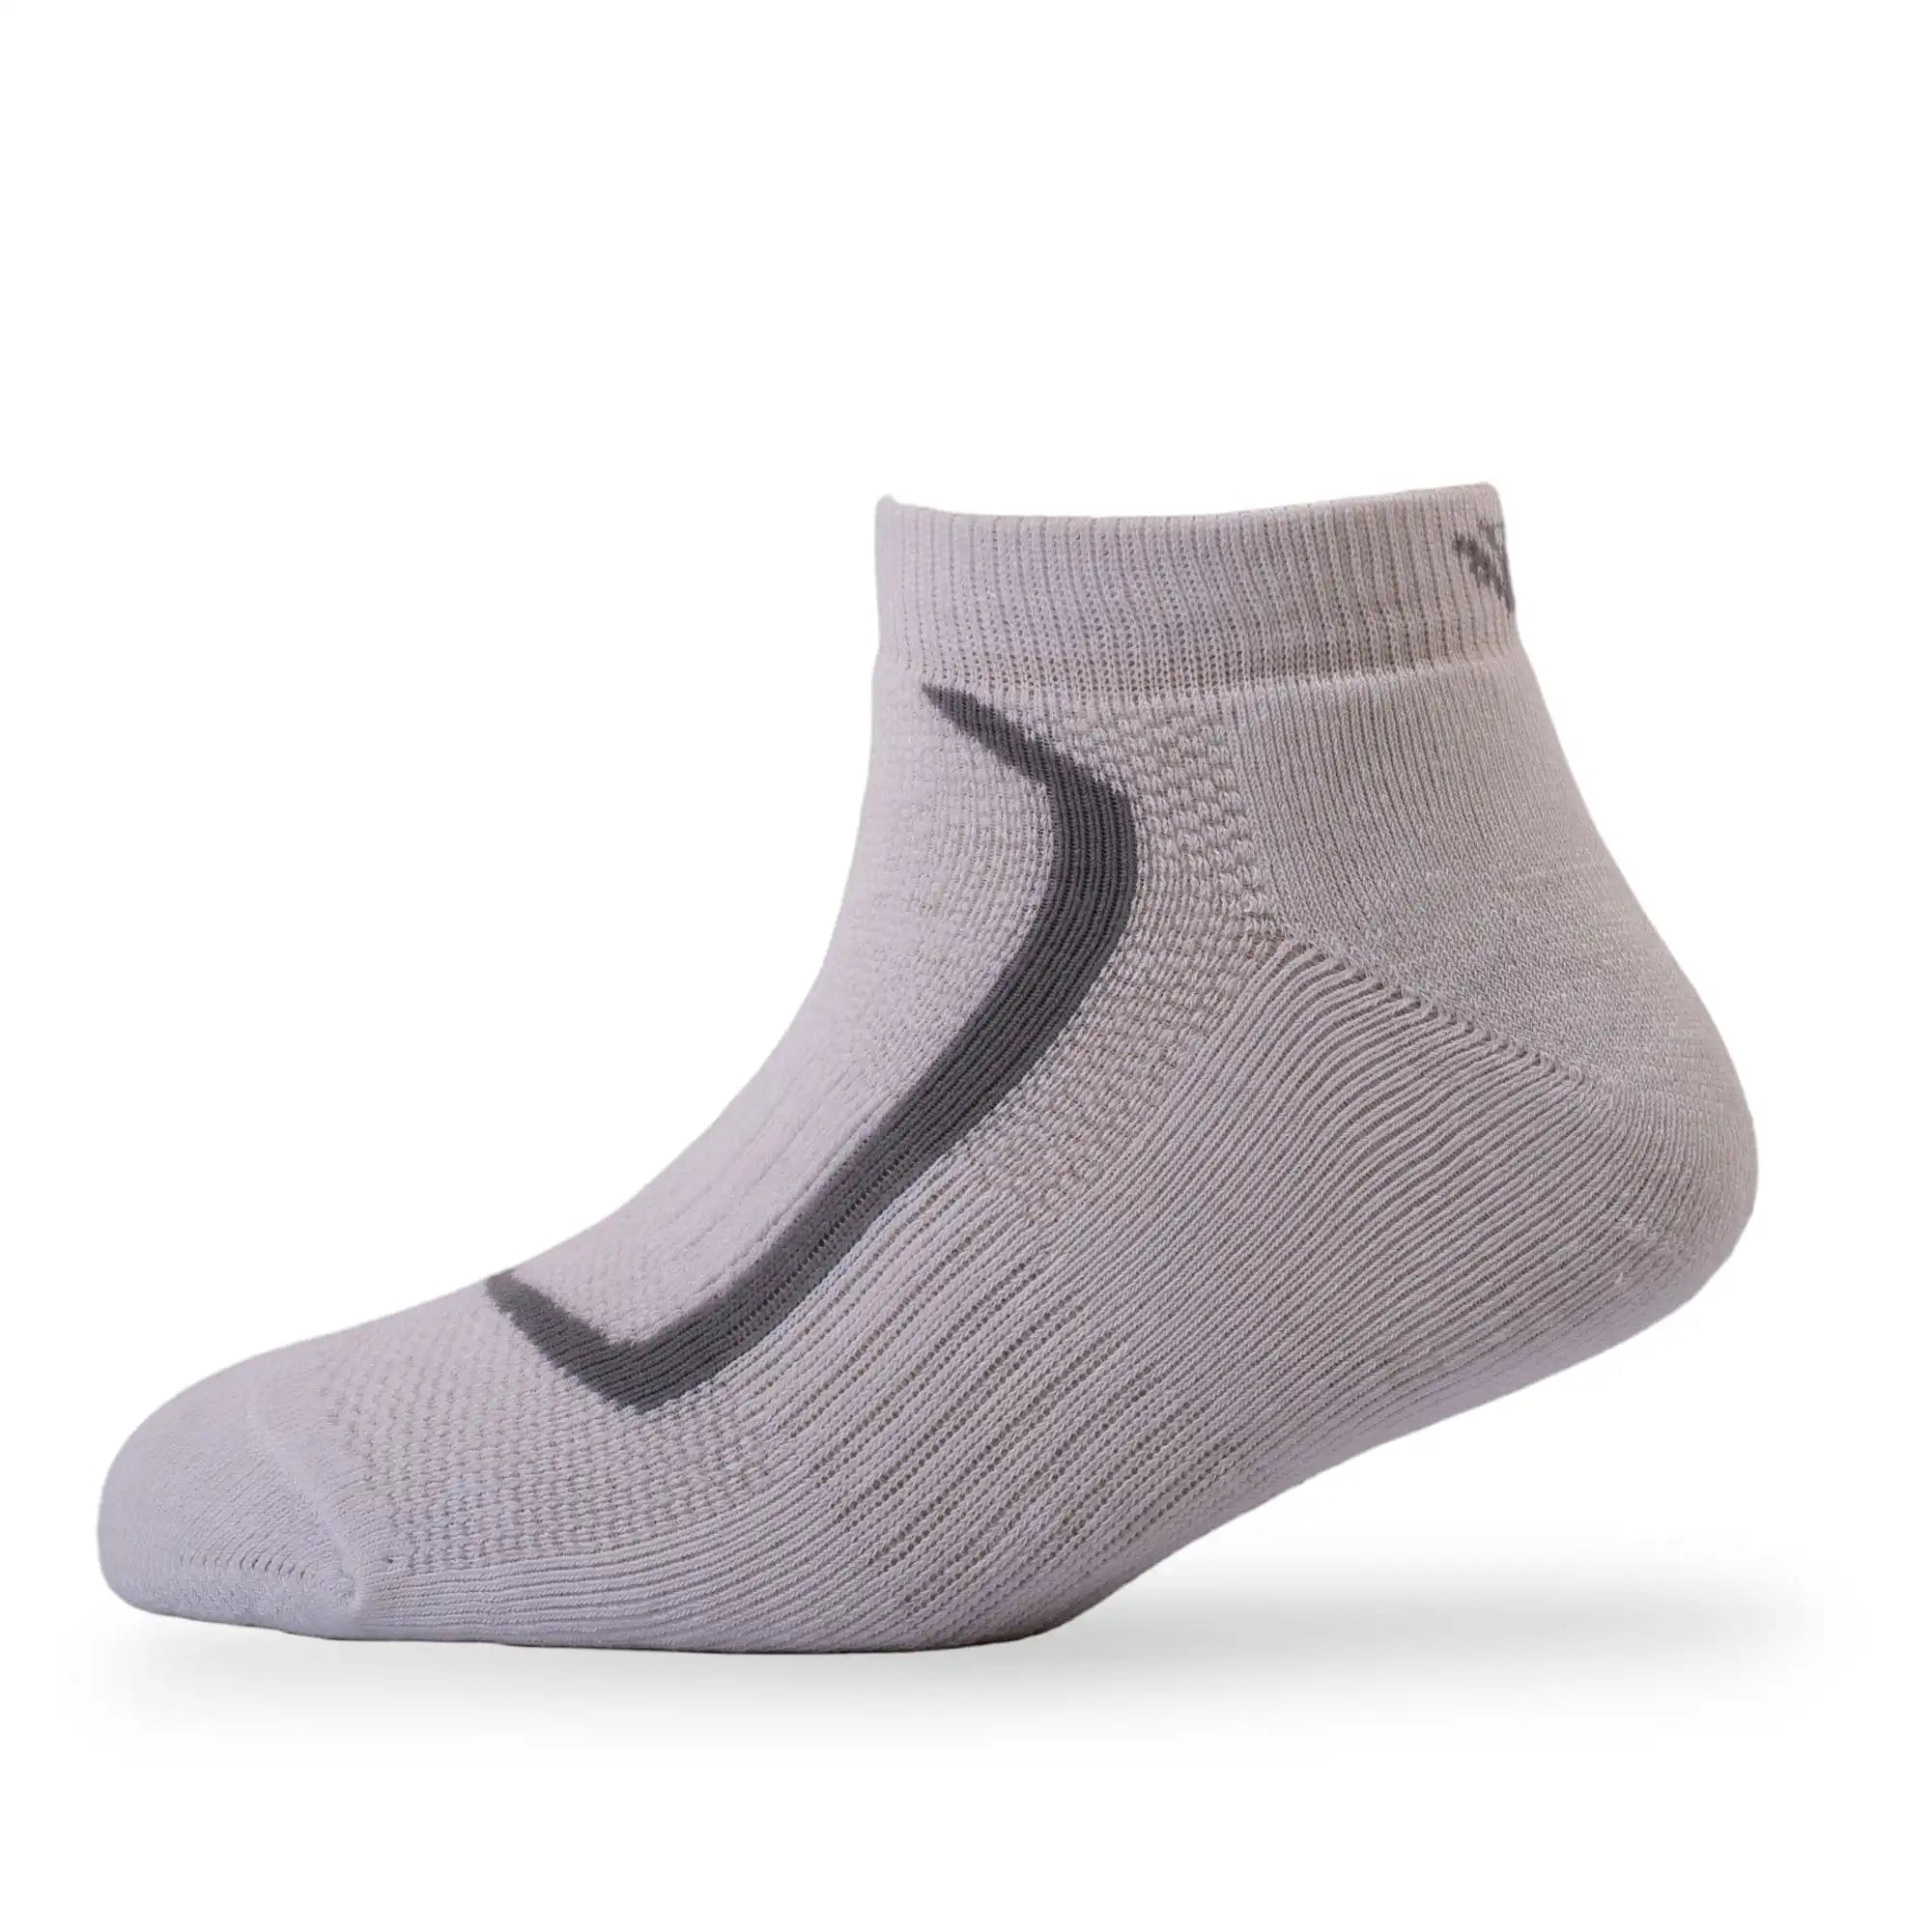 Young Wings Men's Multi Colour Cotton Fabric Design Low Ankle Length Socks - Pack of 3, Style no. 1604-M1